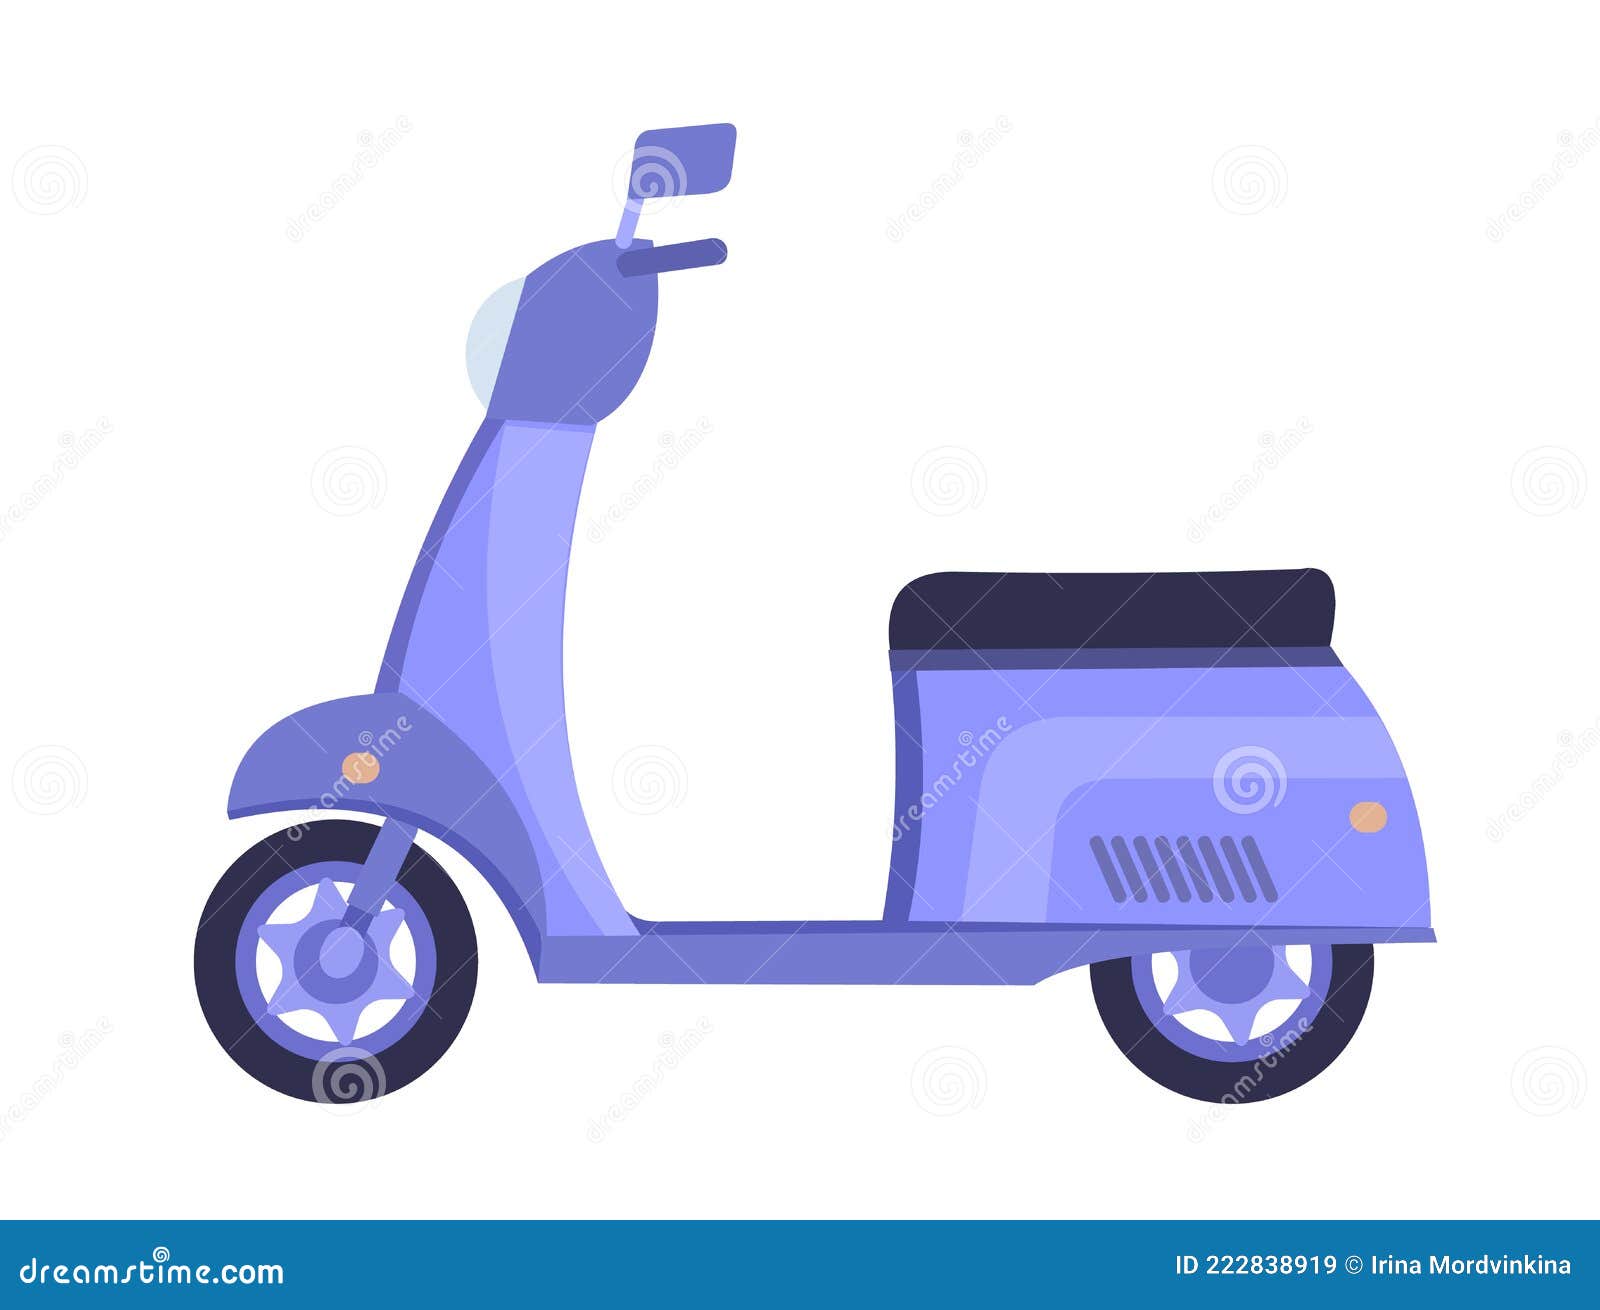 Scooter Bike Cartoon. the Illustration is Isolated on a White Background.  Side View. Cool Motorcycle Stock Vector - Illustration of power, deliver:  222838919